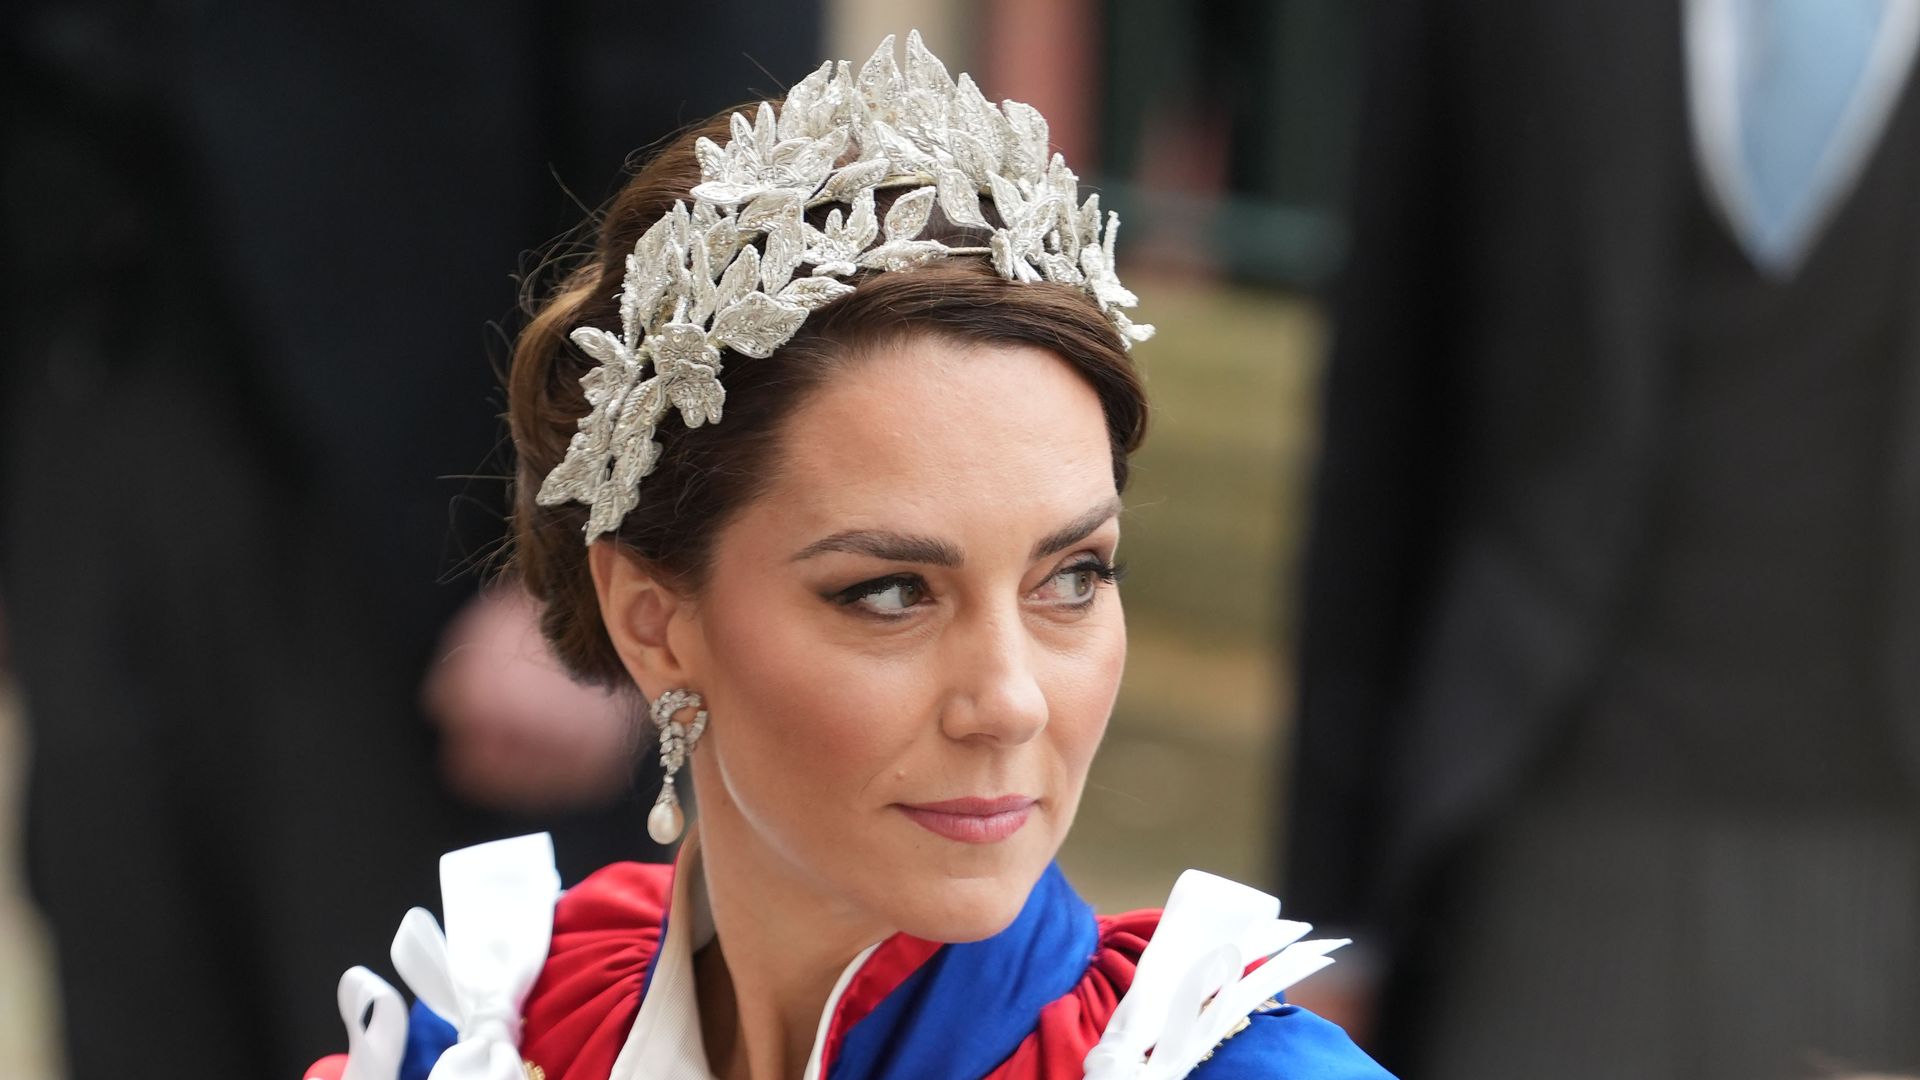 Kate Middleton coronation outfit: Princess sparkles in statement floral ...